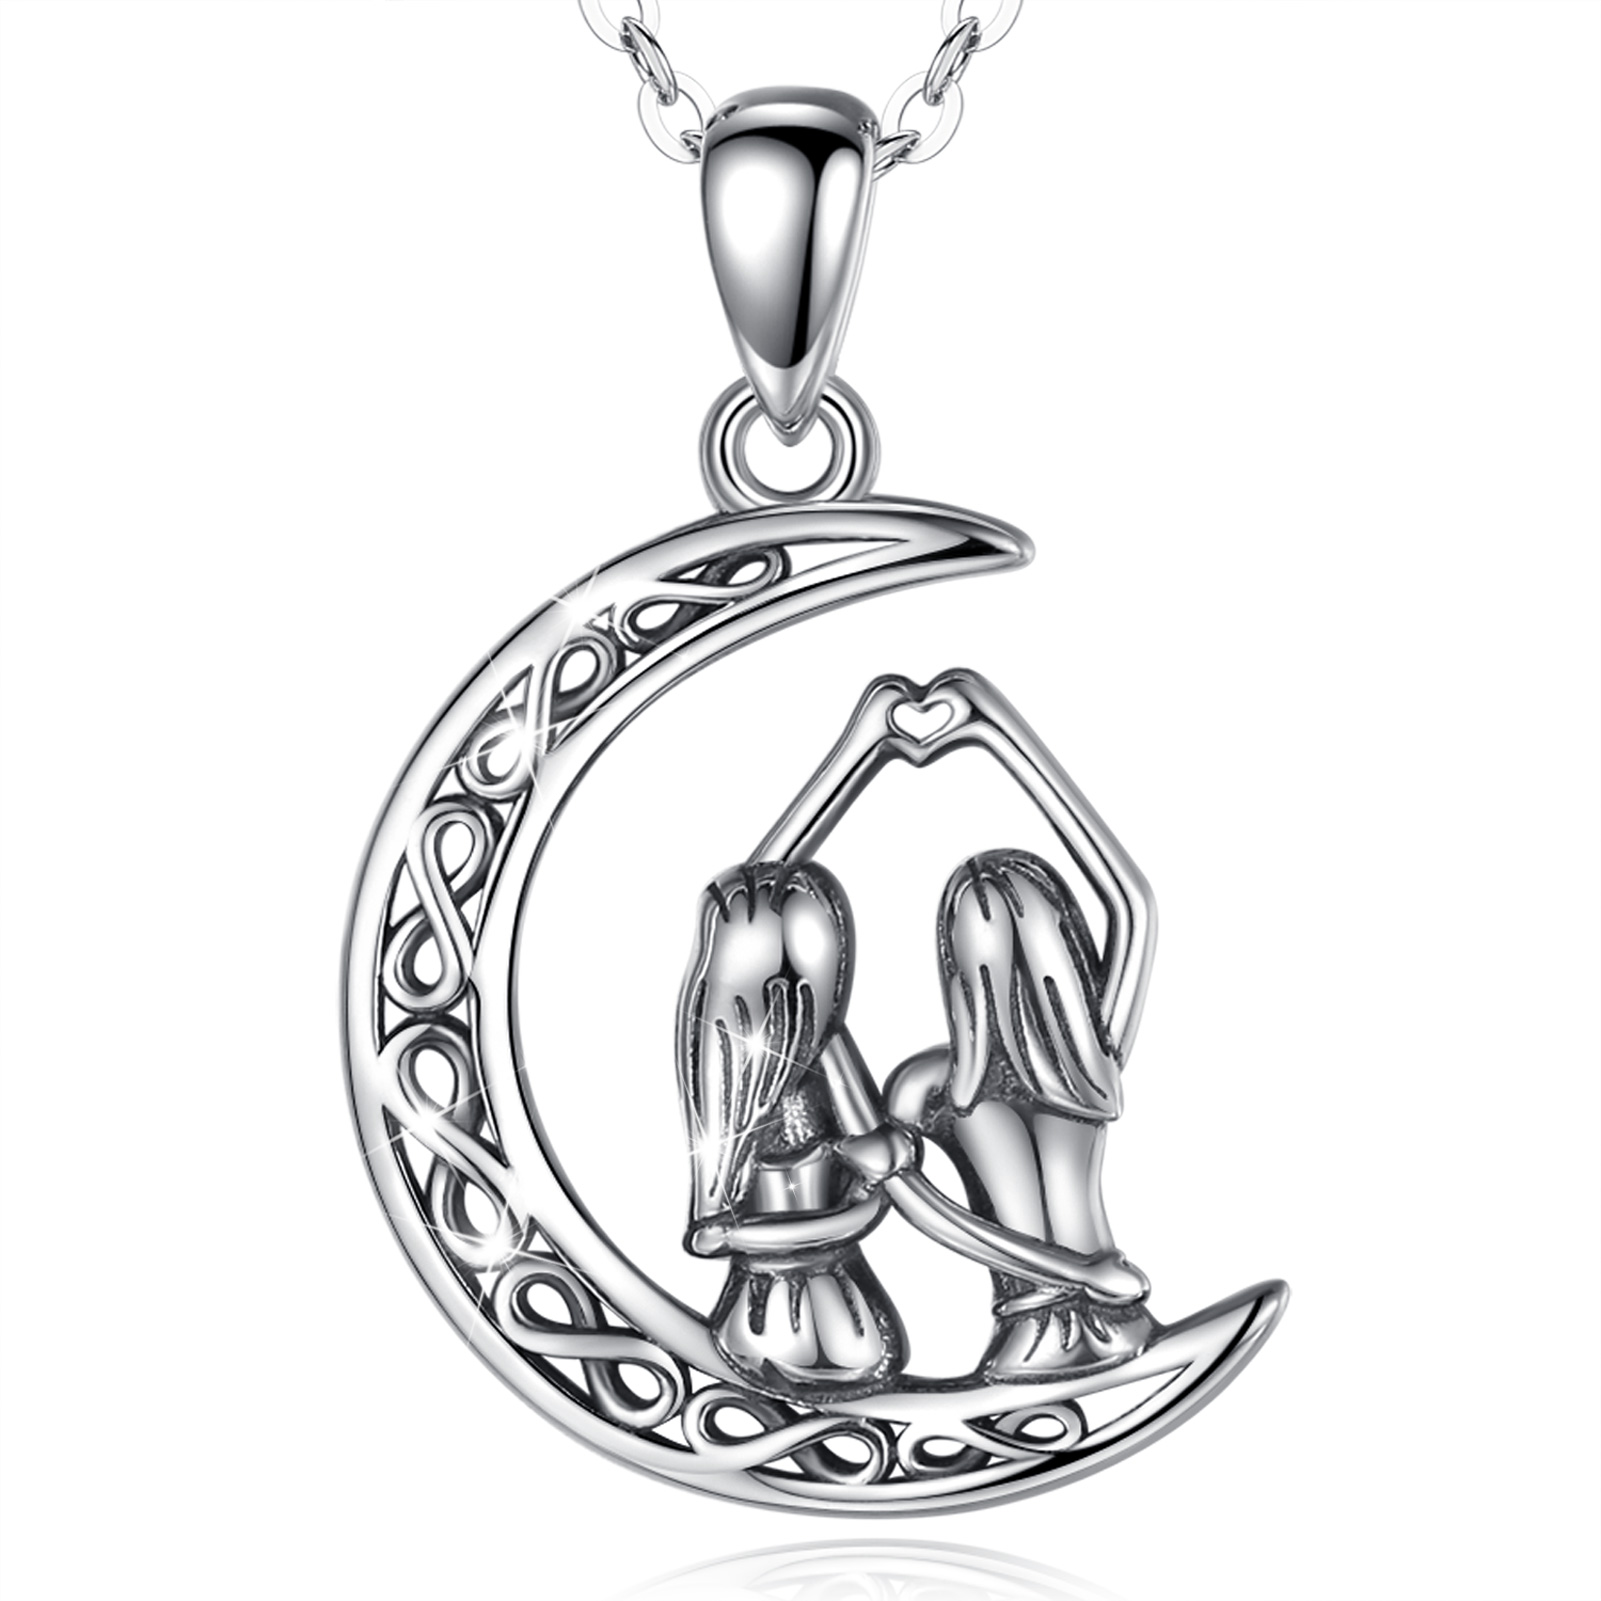 Merryshine Jewelry S925 Sterling Silver Soul Sister Gifts Crescent Moon Pendant Necklace